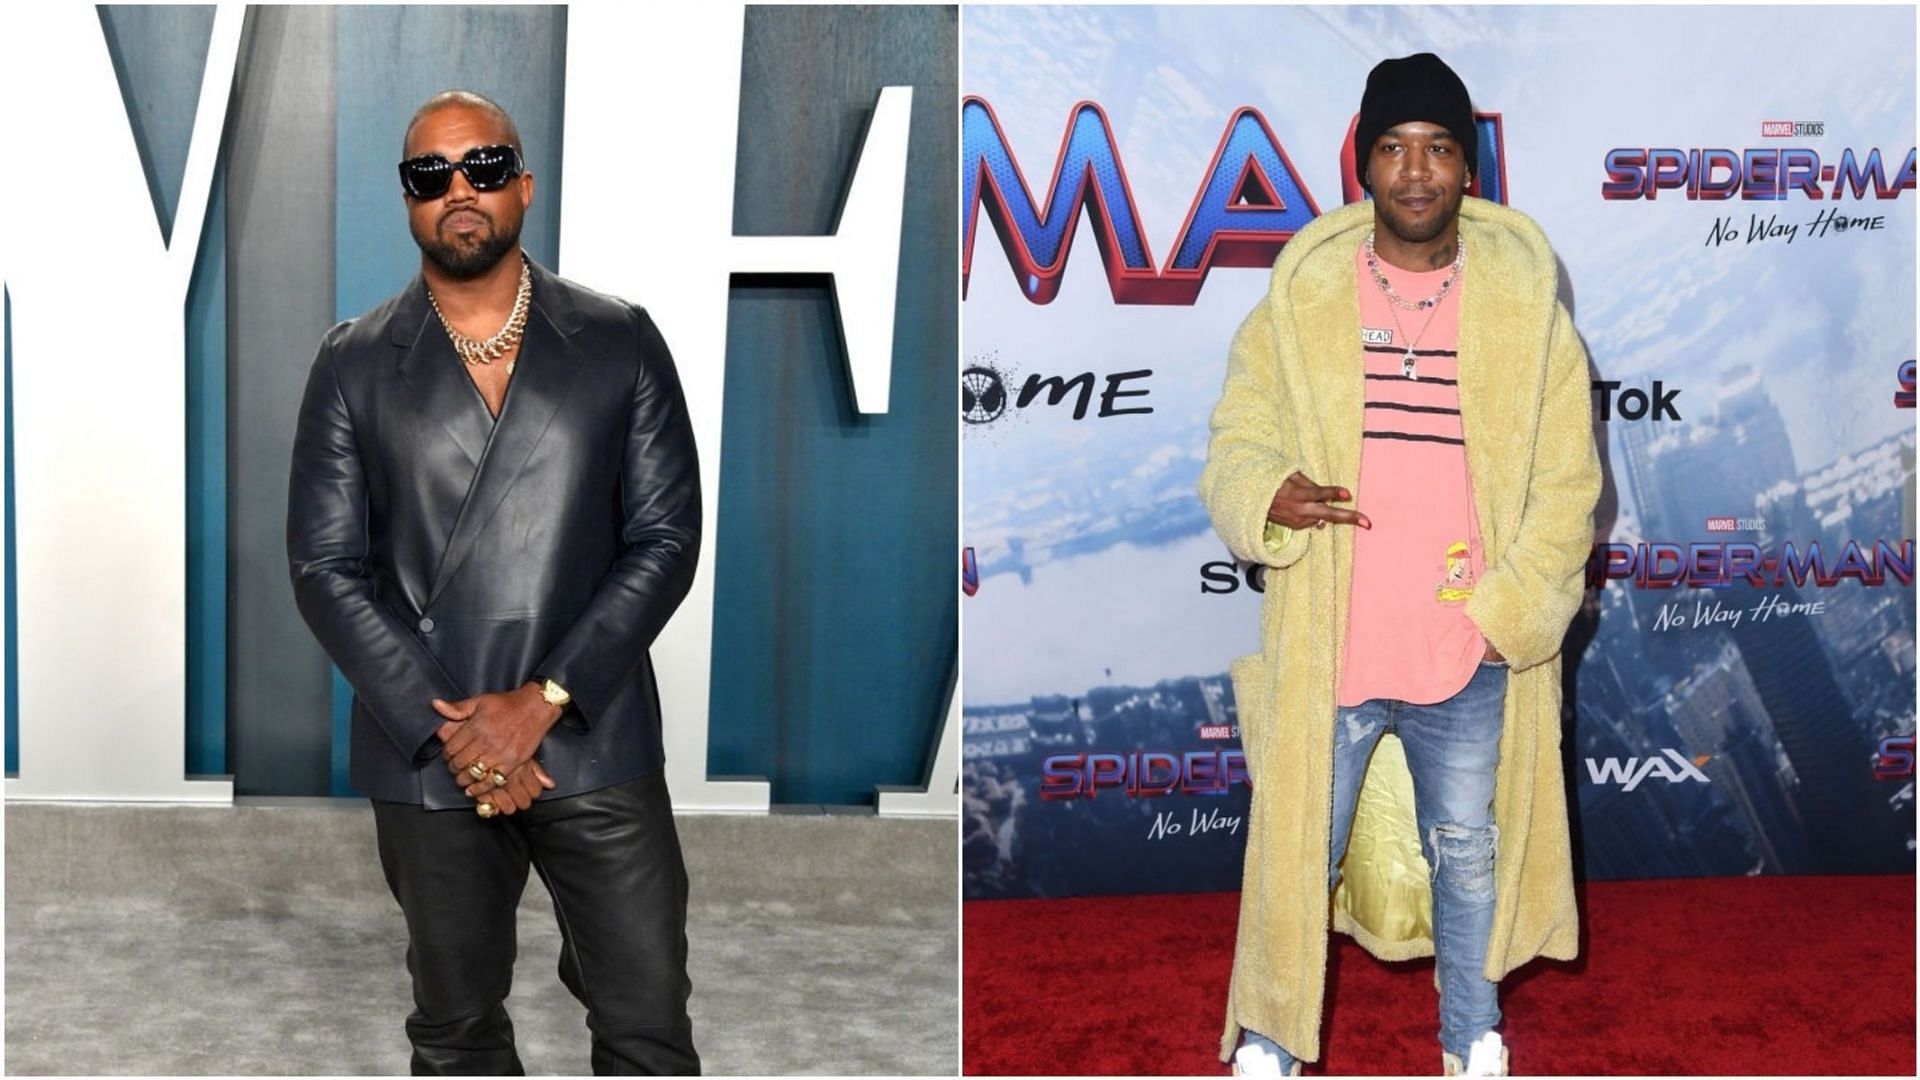 Kanye West revealed that Kid Cudi will not be a part of Donda 2 (Images via George Pimentel and Steve Granitz/Getty Images)